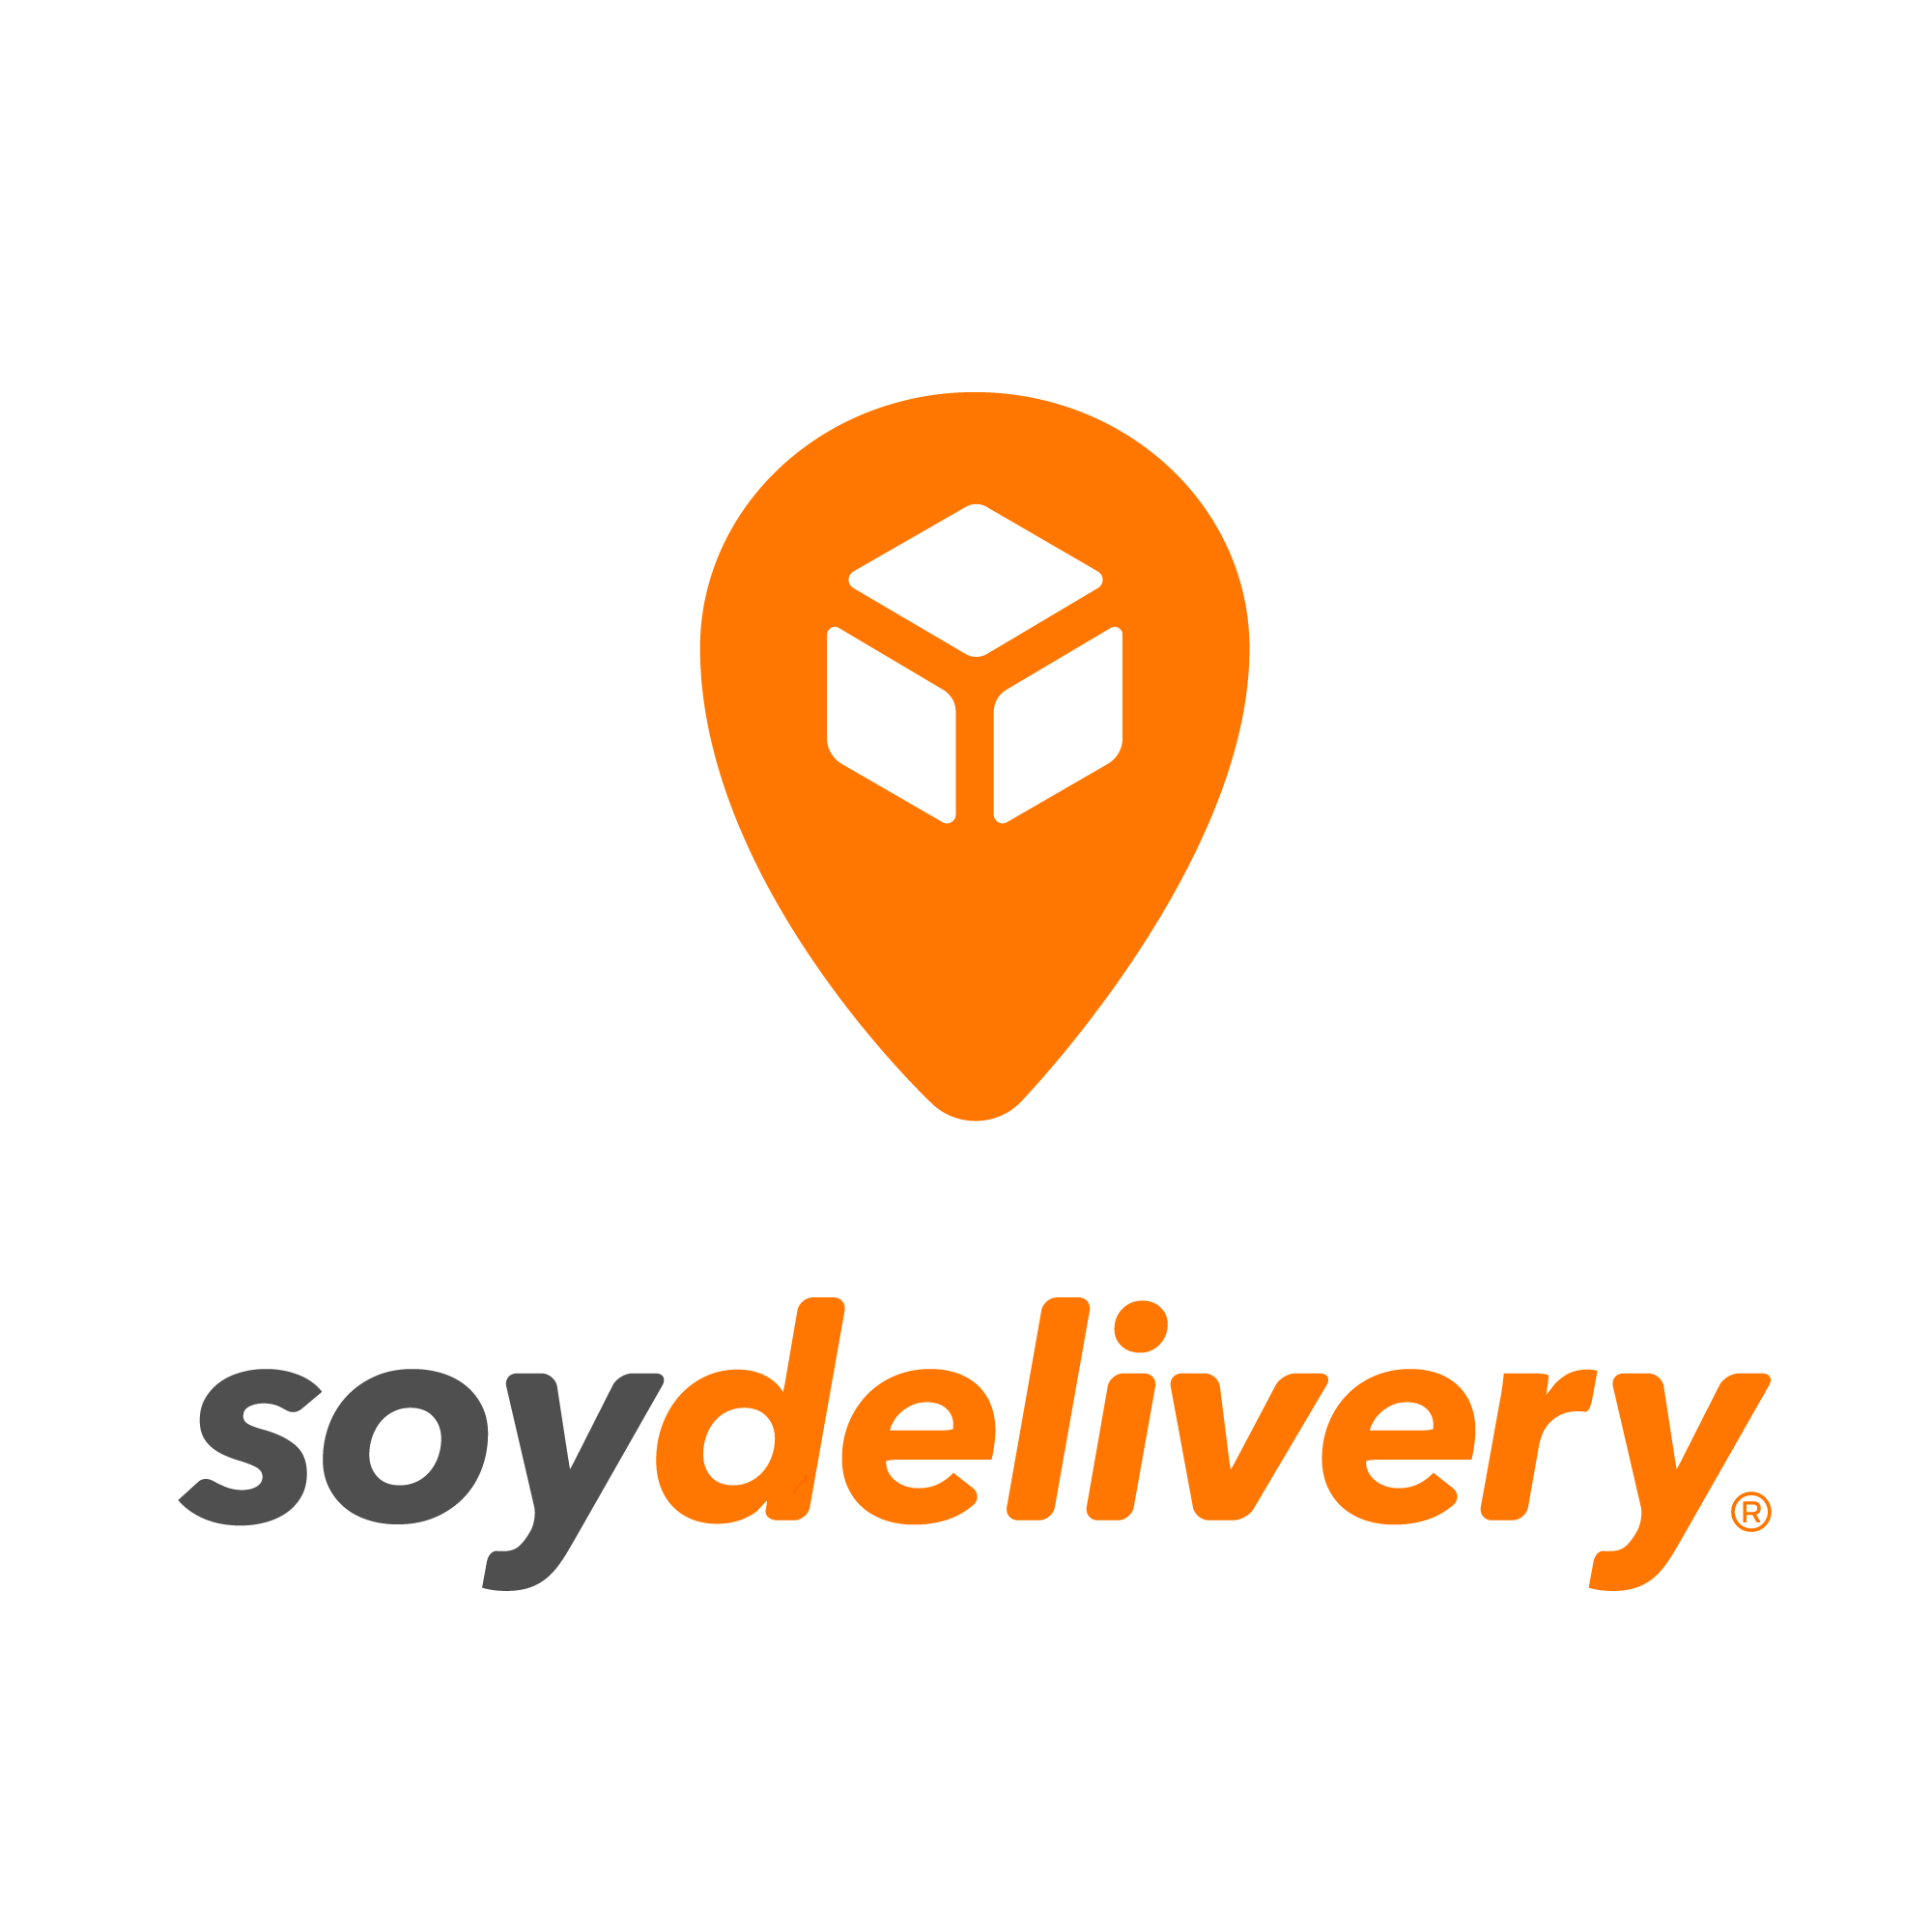 Soy delivery Express 24 hs